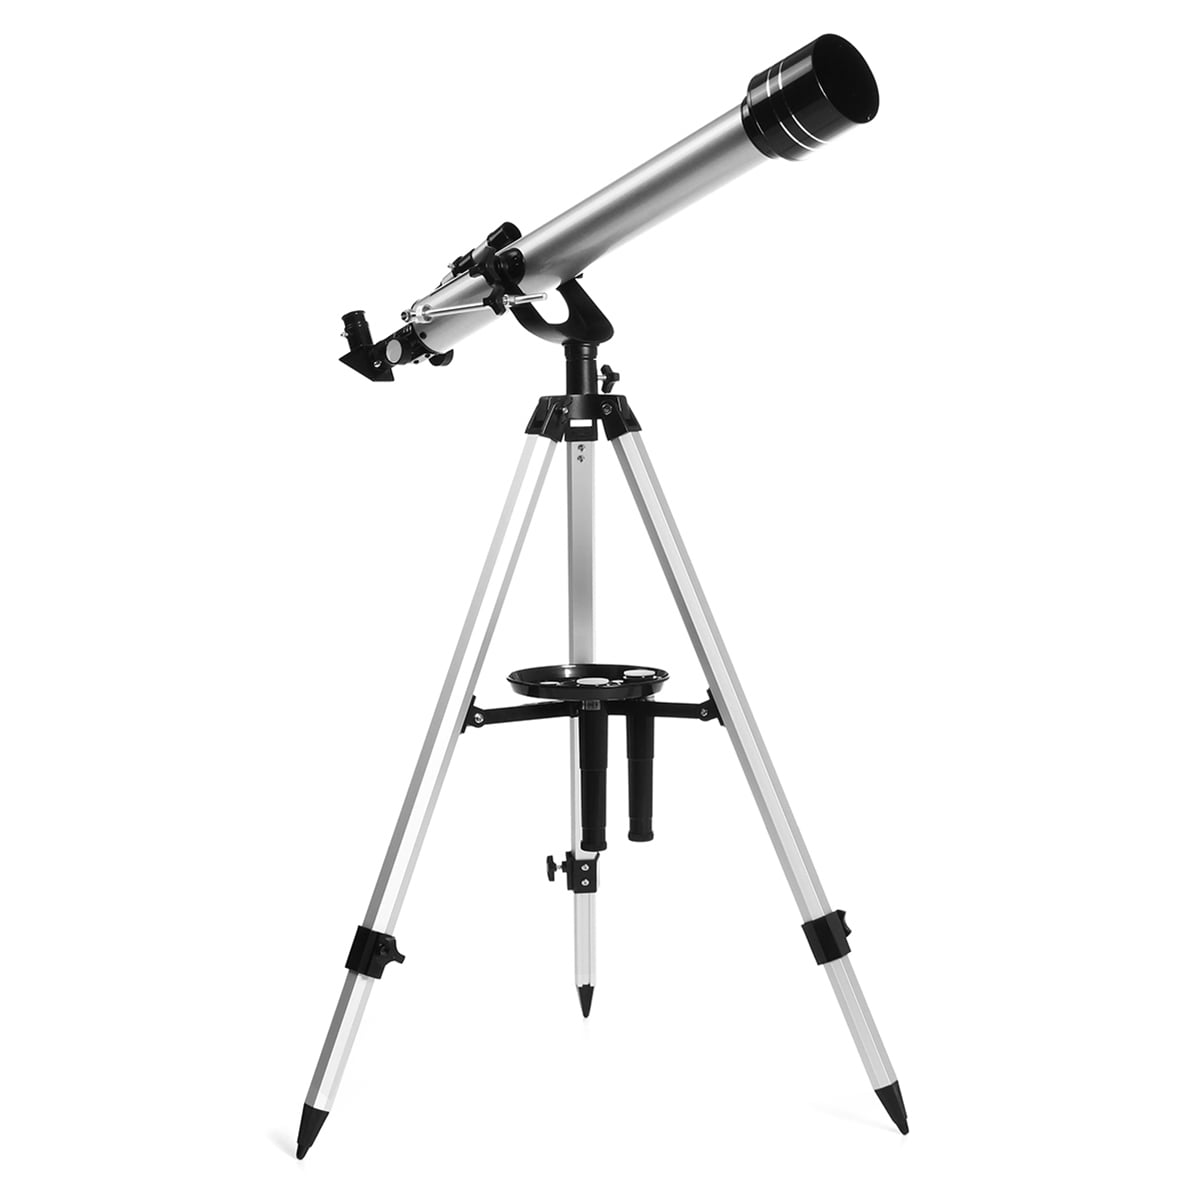 700mm Refractor Telescope with Tripod & Finder Scope, Portable Telescope  for Kids & Astronomy Beginners, Travel Scope with 3 Magnification eyepieces  & 